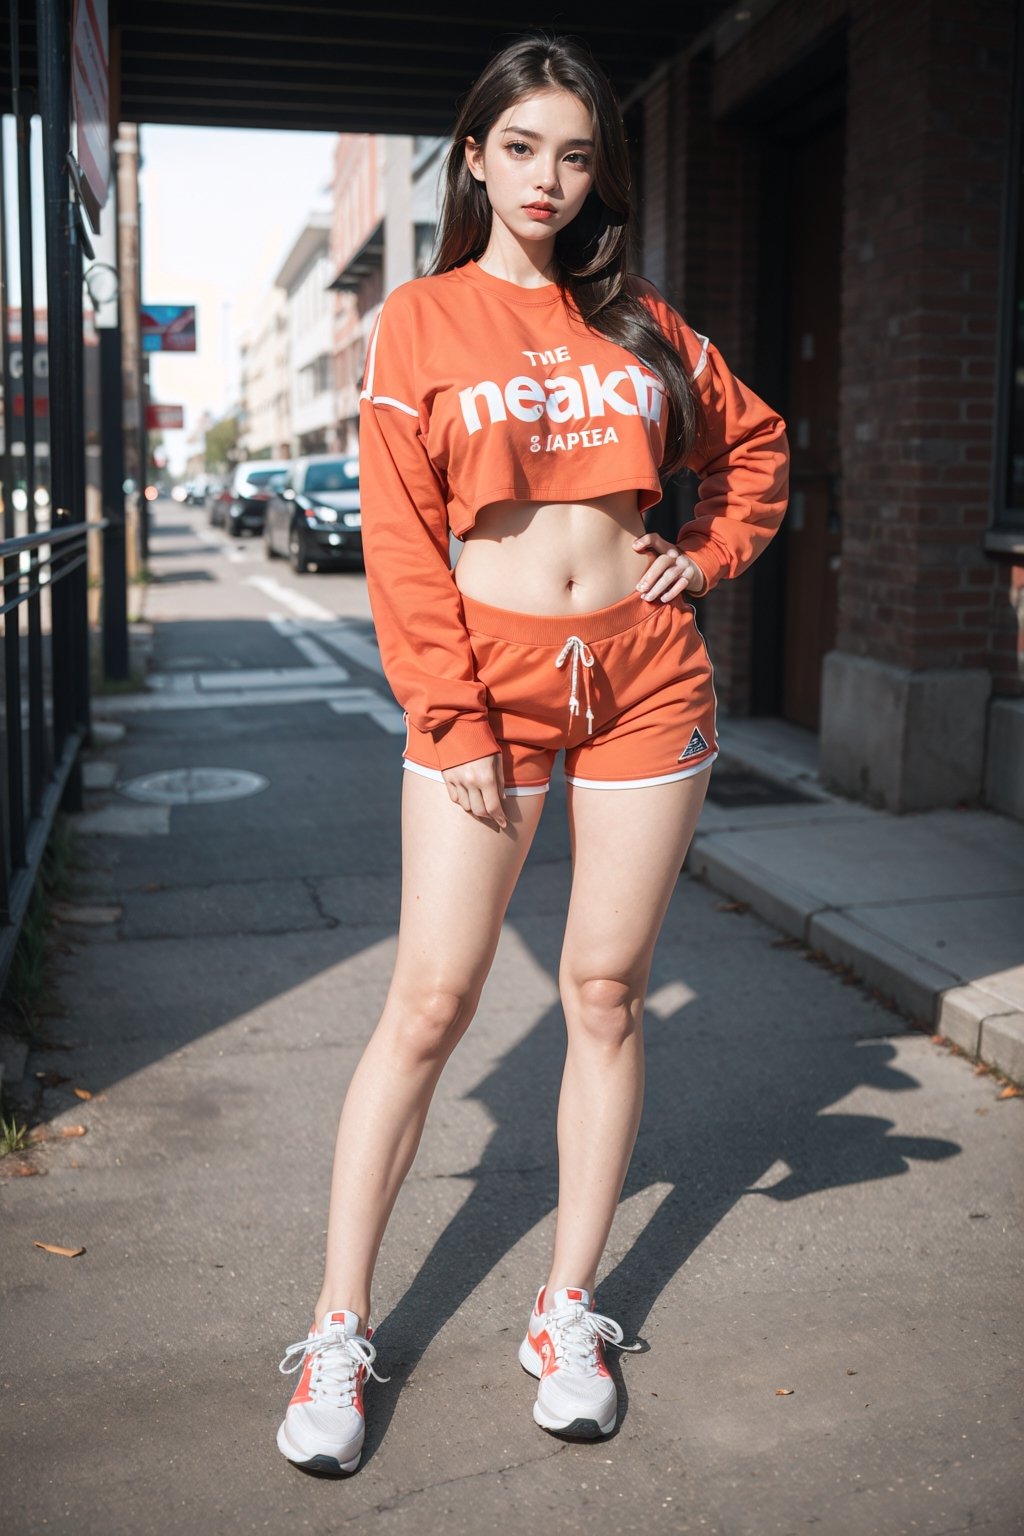 1girl, Oversized sweatshirt, biker shorts, and sneakers, posing for a picture, professional photoshoot,
brunette, long hair, huge breasts, wide hips, glossy coral lips, seductive,